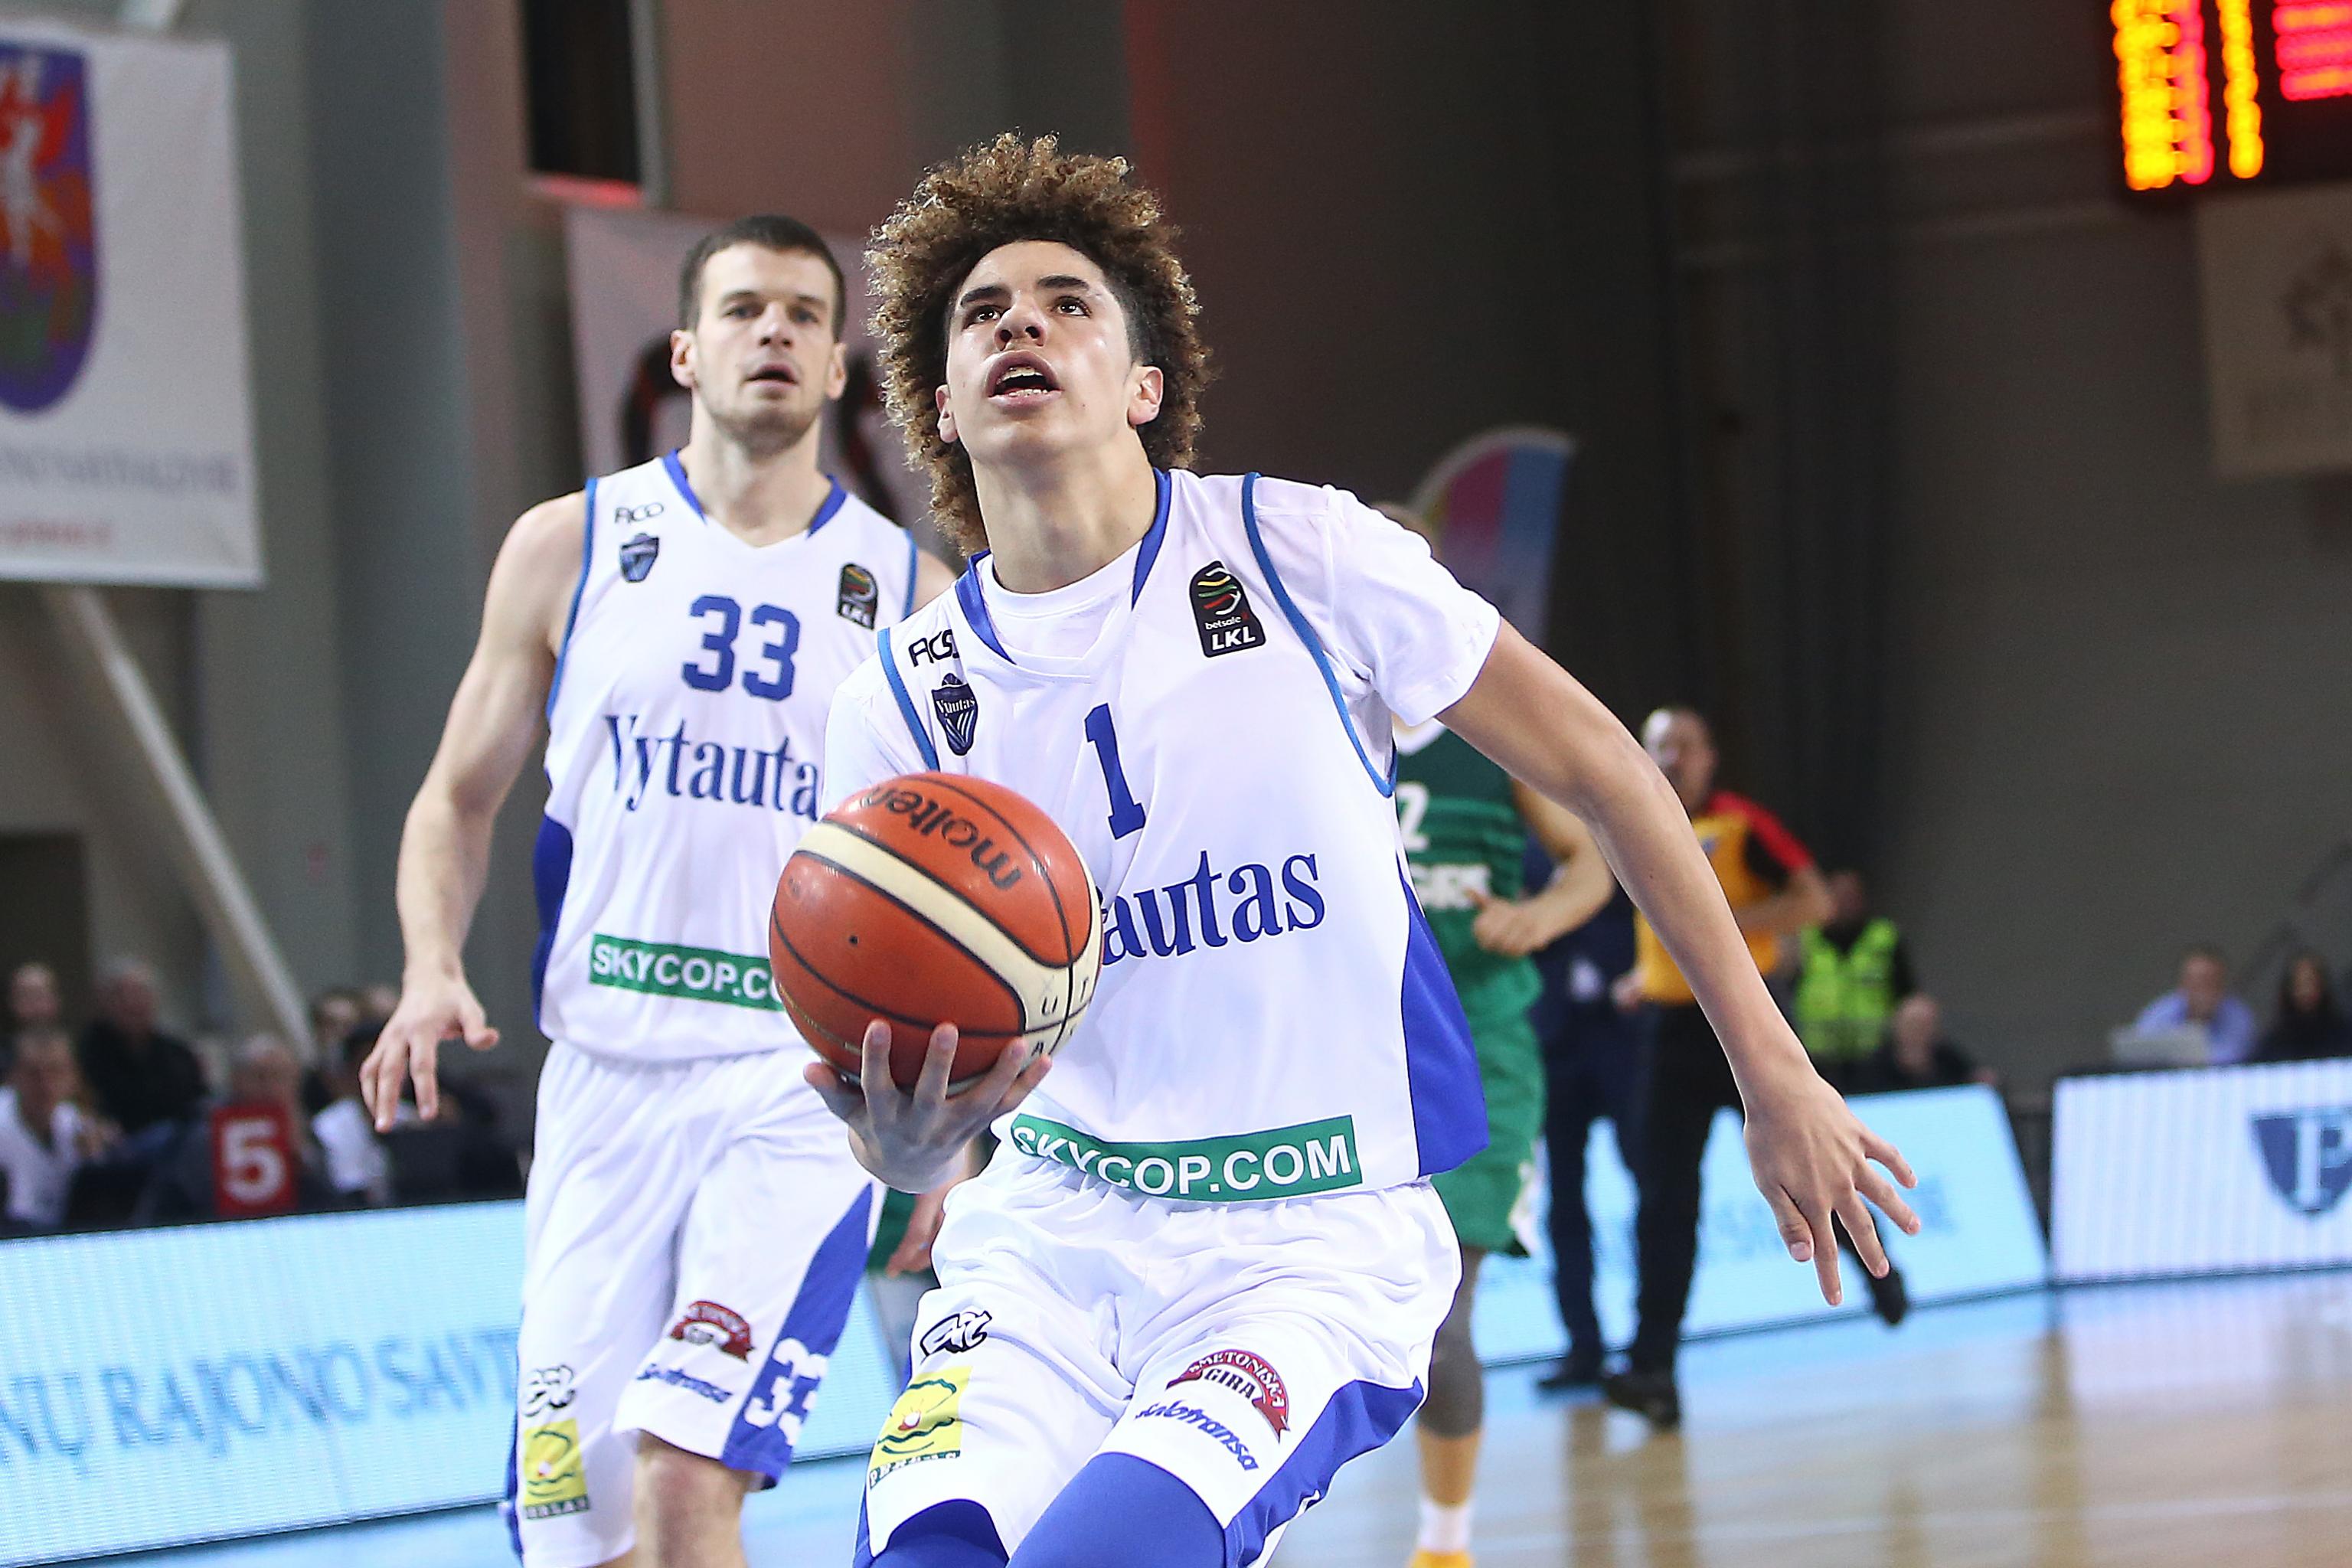 Bleacher Report on X: LaMelo Ball dropped 42 points in SPIRE's